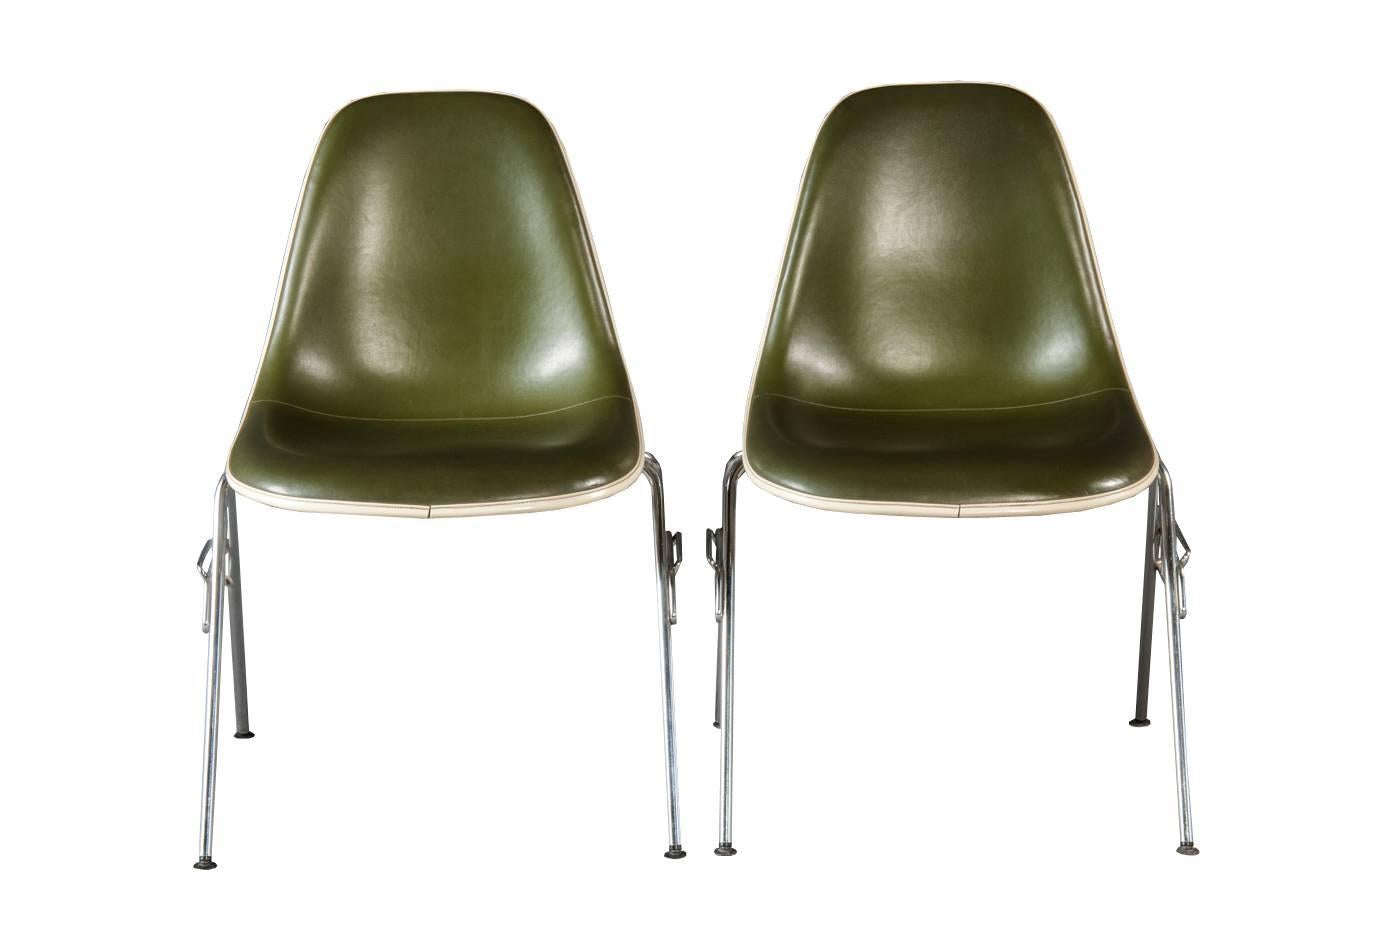 Model DSS chair designed in 1955 by Charles and Ray Eames and produced by Vitra for Herman Miller. 

The chairs feature a cream-colored fiberglass shells on a stacking base with linking element. The chairs are upholstered in original dark green